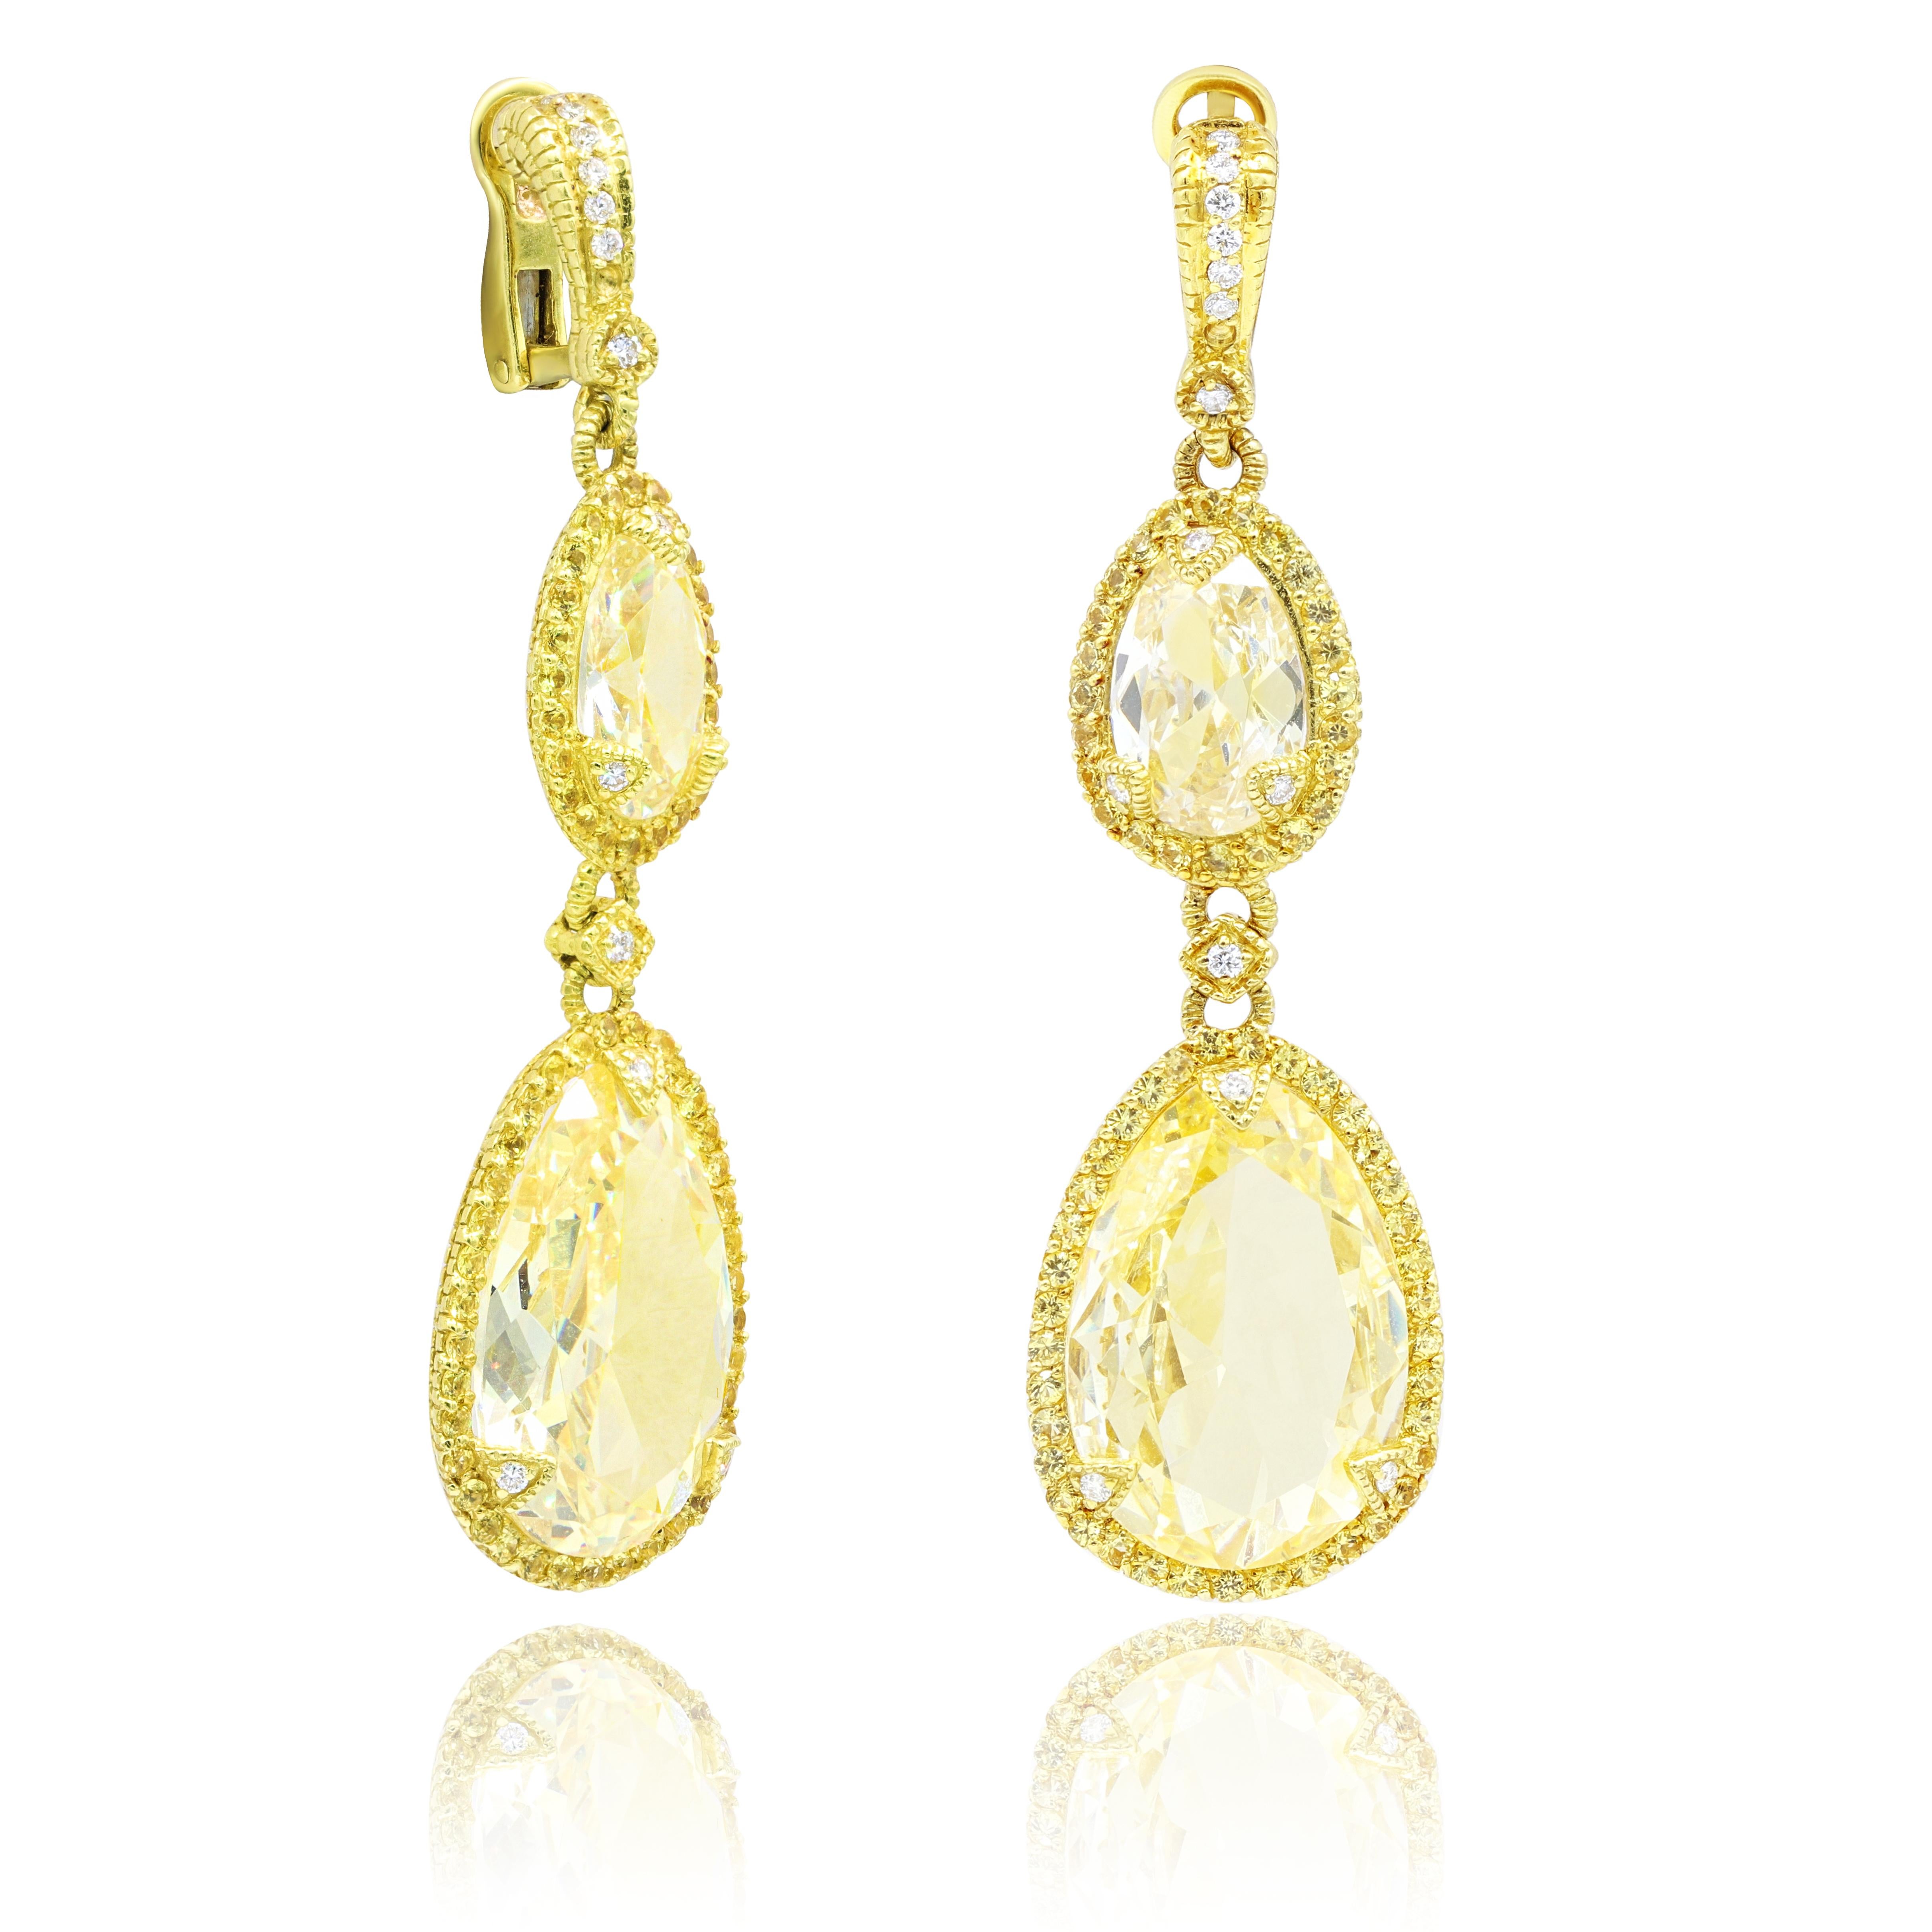 18KT Yellow gold citrine and yellow sapphire earrings, features 40.00ct of Oval Citrine, 5.00 ct of yellow sapphires.